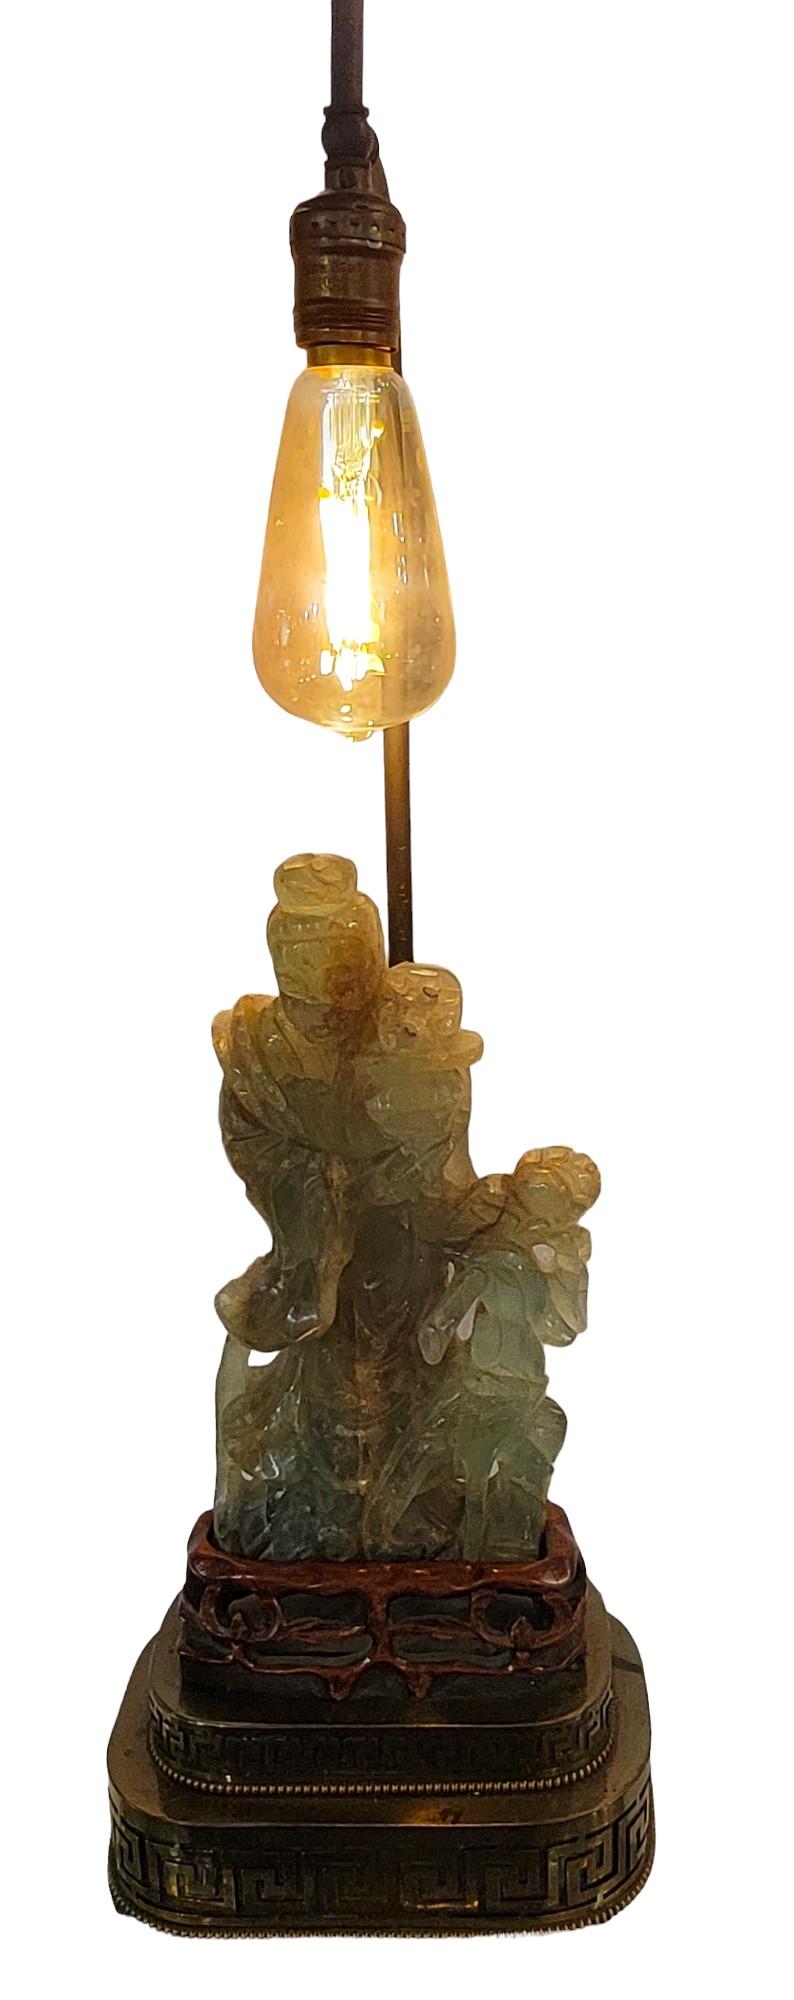 Antique Hand Carved Jade Table Lamp. Beautiful hand carved jade over a hand carved wooden stand. That stand sits snug above a brass lamp base. The base has a patinaed copper extension leading over he jade sculpture. 
Wear to jade sculpture from age